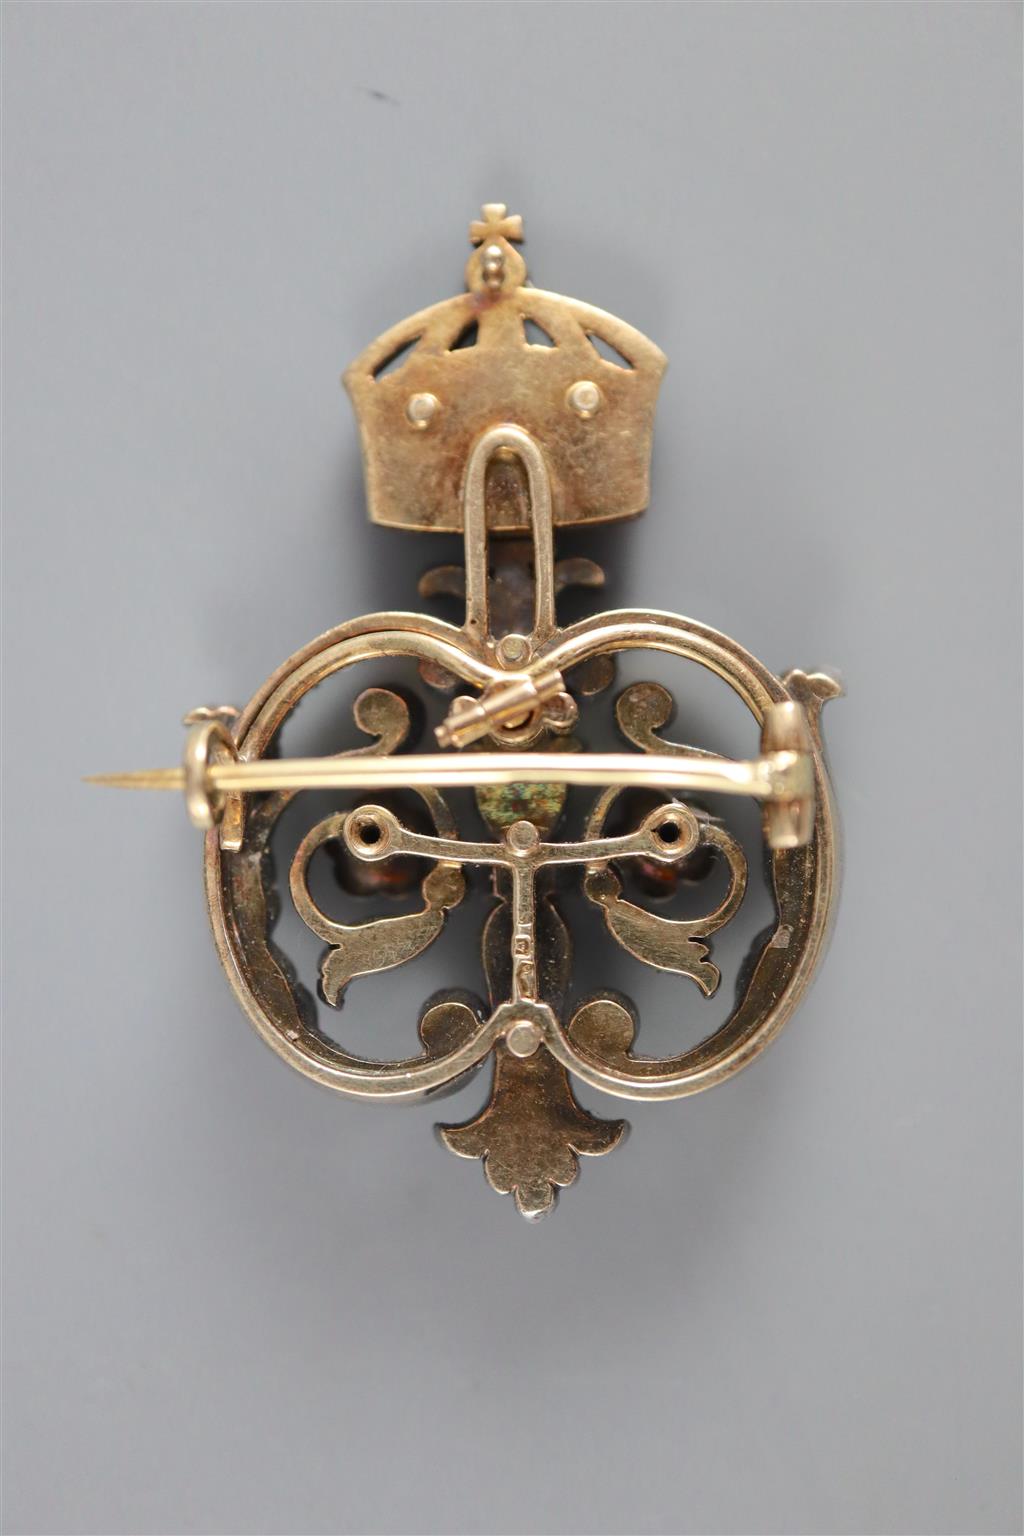 A late 19th/early 20th century Austro-Hungarian 580 standard gold and silver, rose cut diamond and enamel scroll brooch,